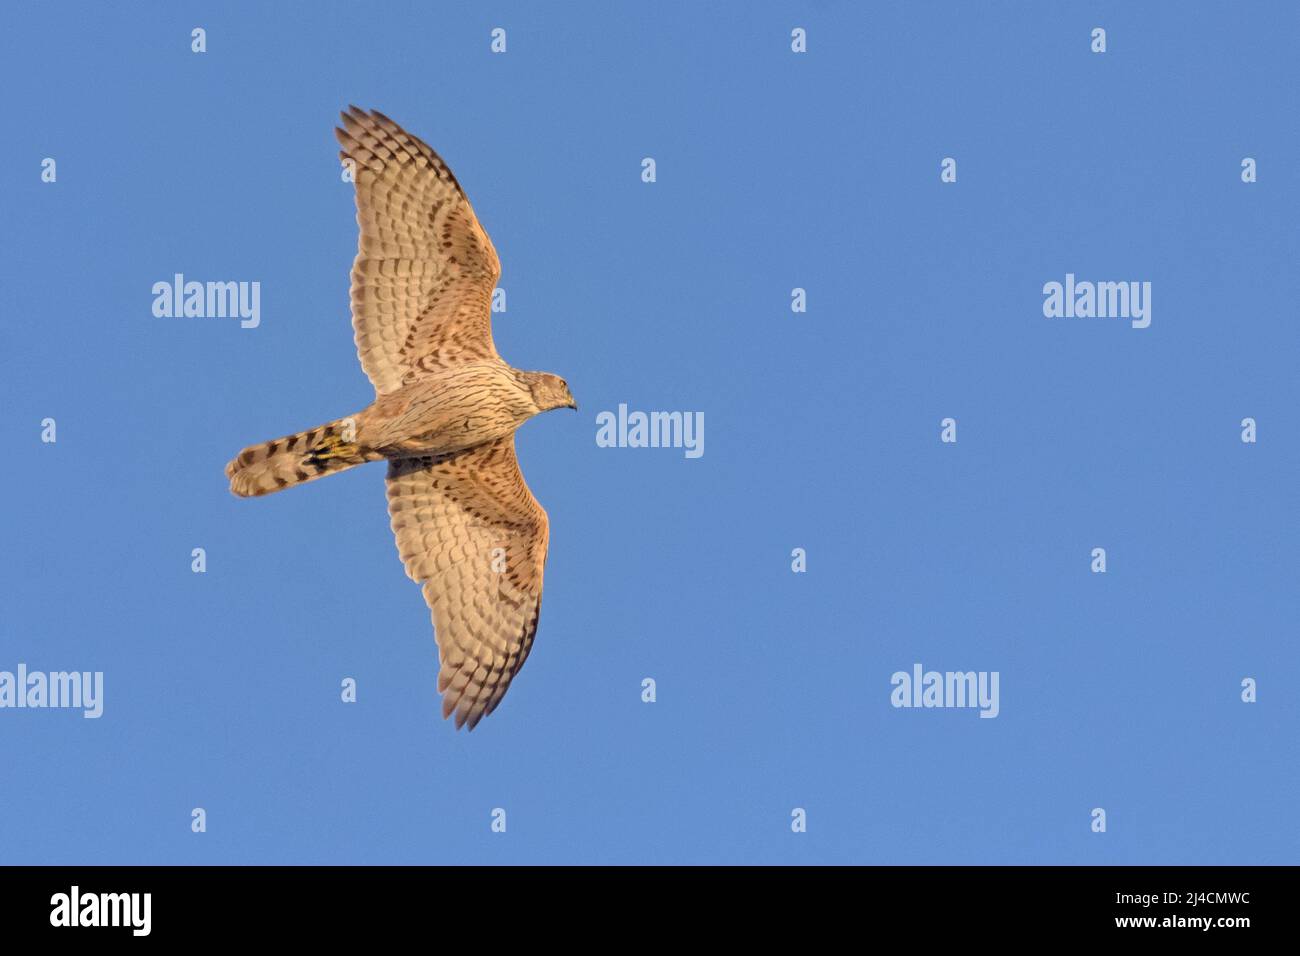 Young northern goshawk (Accipiter gentilis) in speedy flight in blue sky with illuminated body and wings Stock Photo